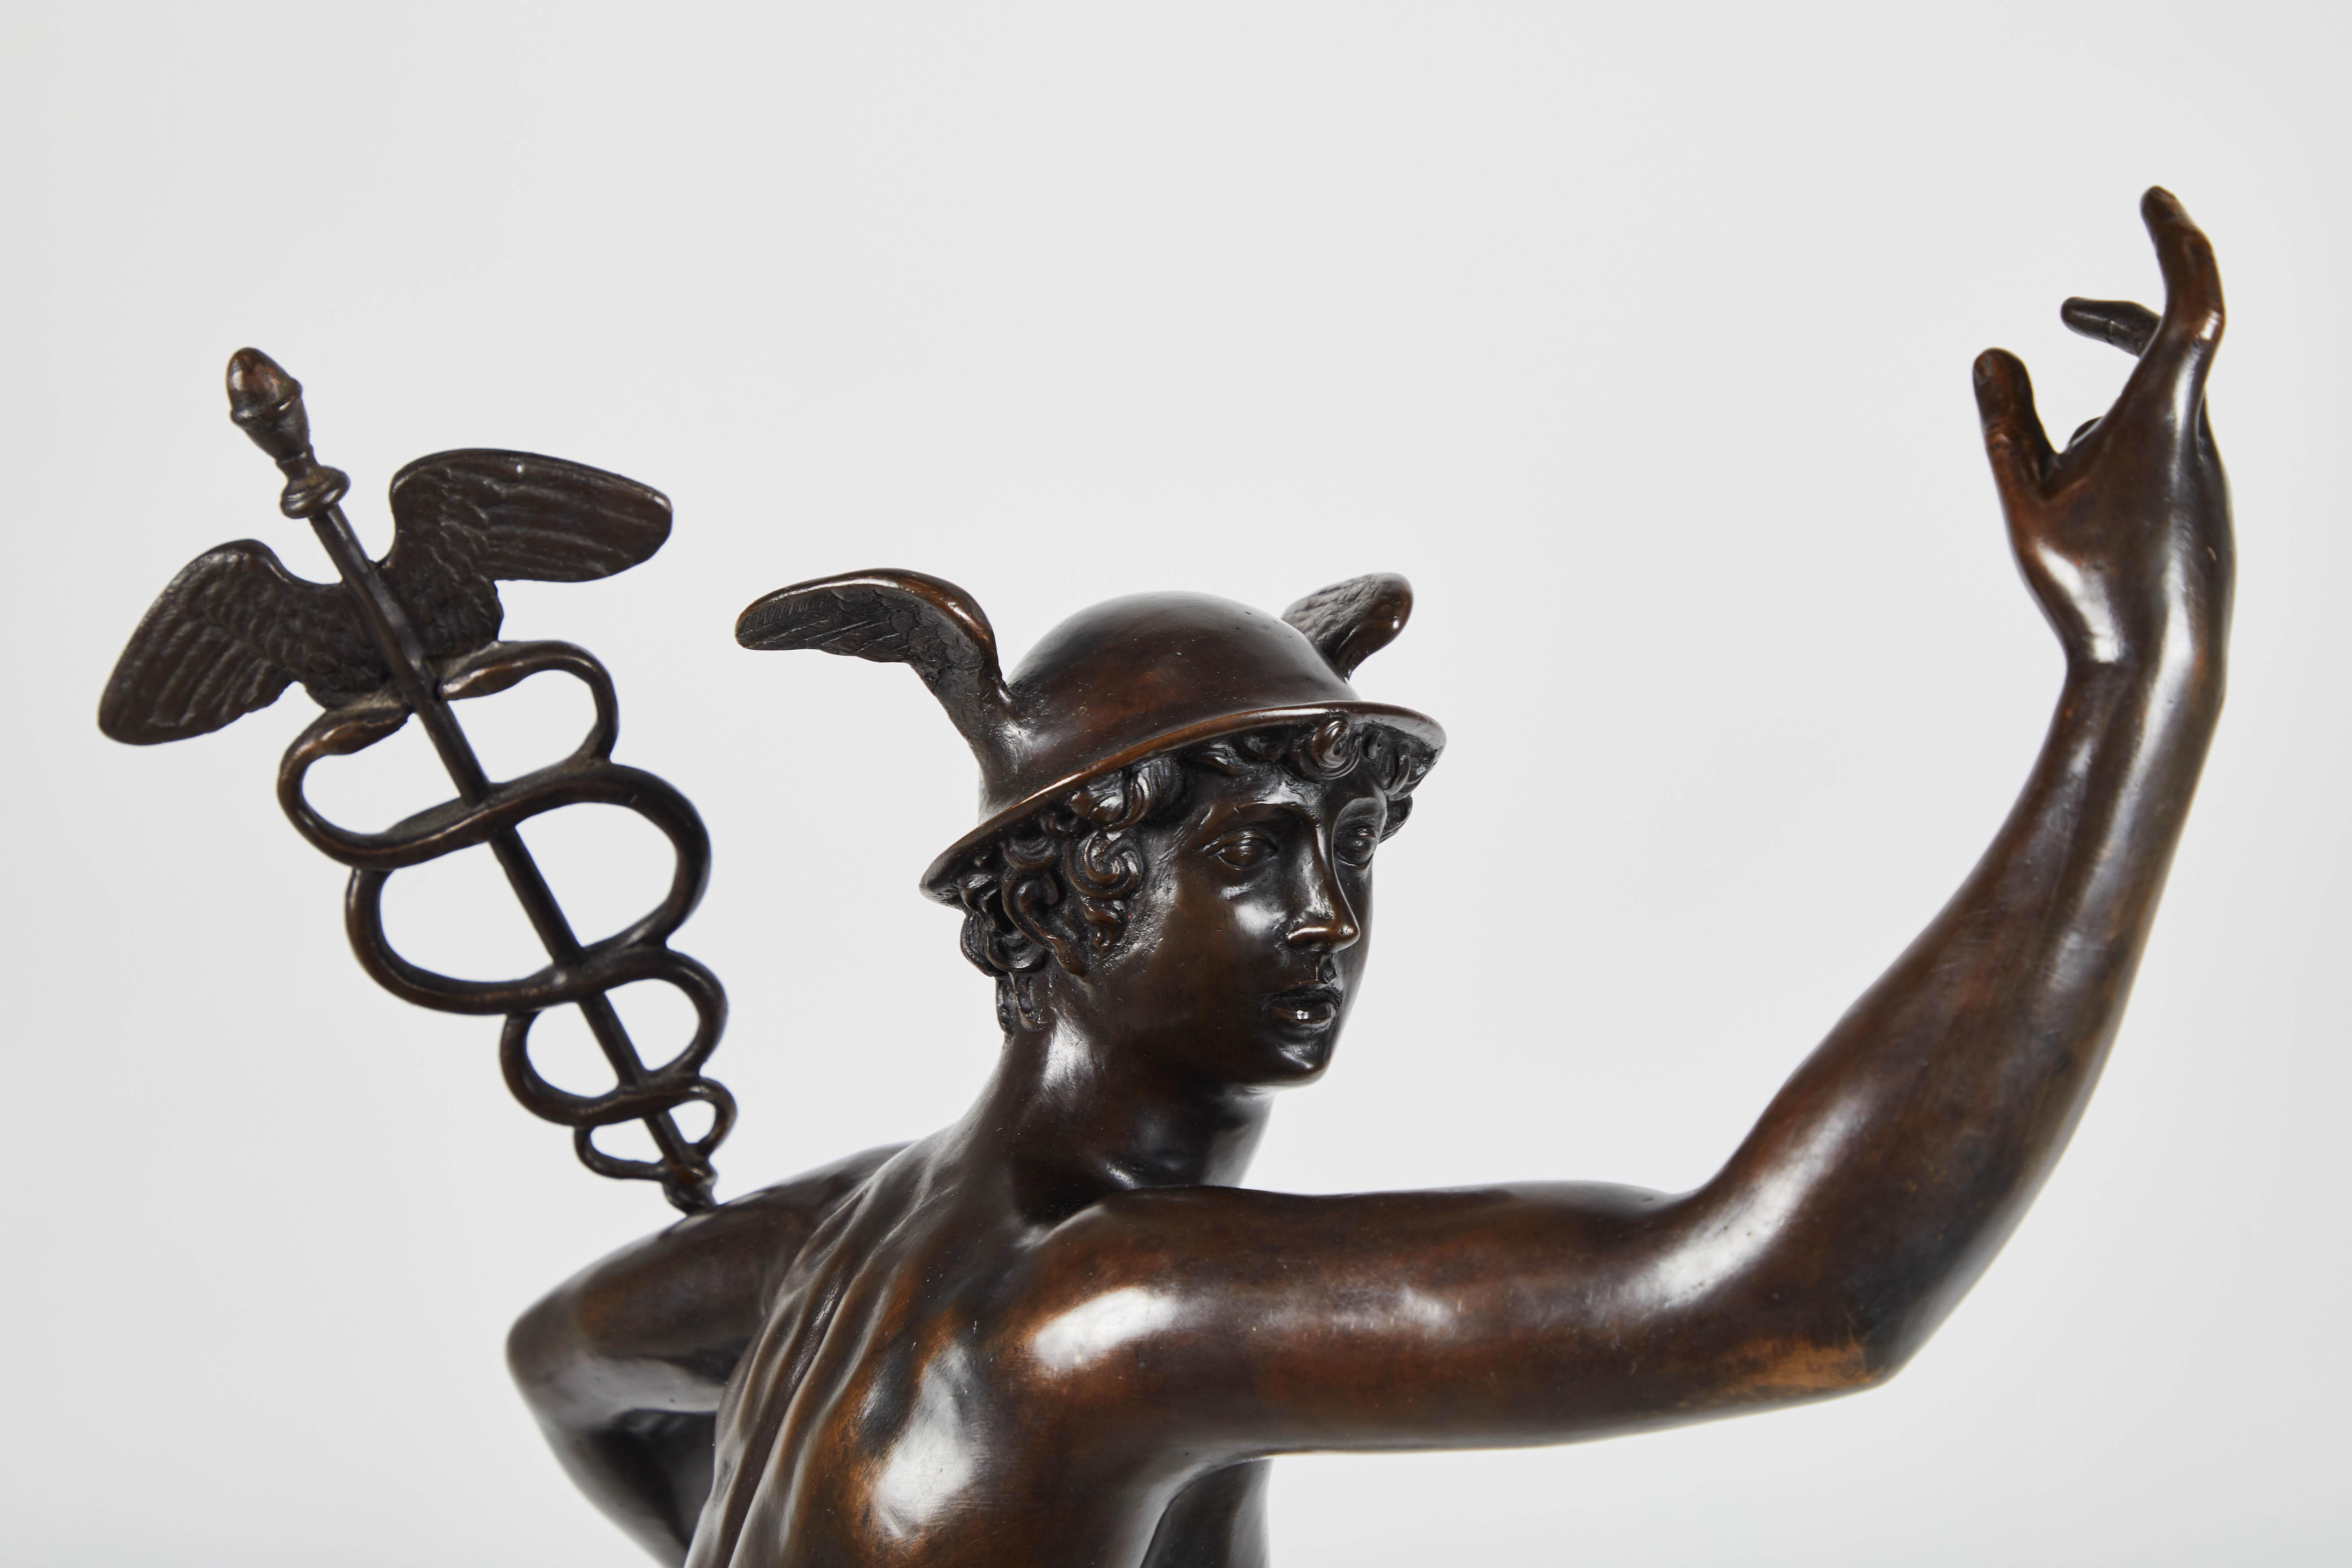 Large patinated bronze sculpture representing Mercury, the messenger of the gods. He is wearing his winged, round petasos hat and carrying a caduceus in his left hand. The wings on his ankles enable him to move quickly and are one of his distinctive